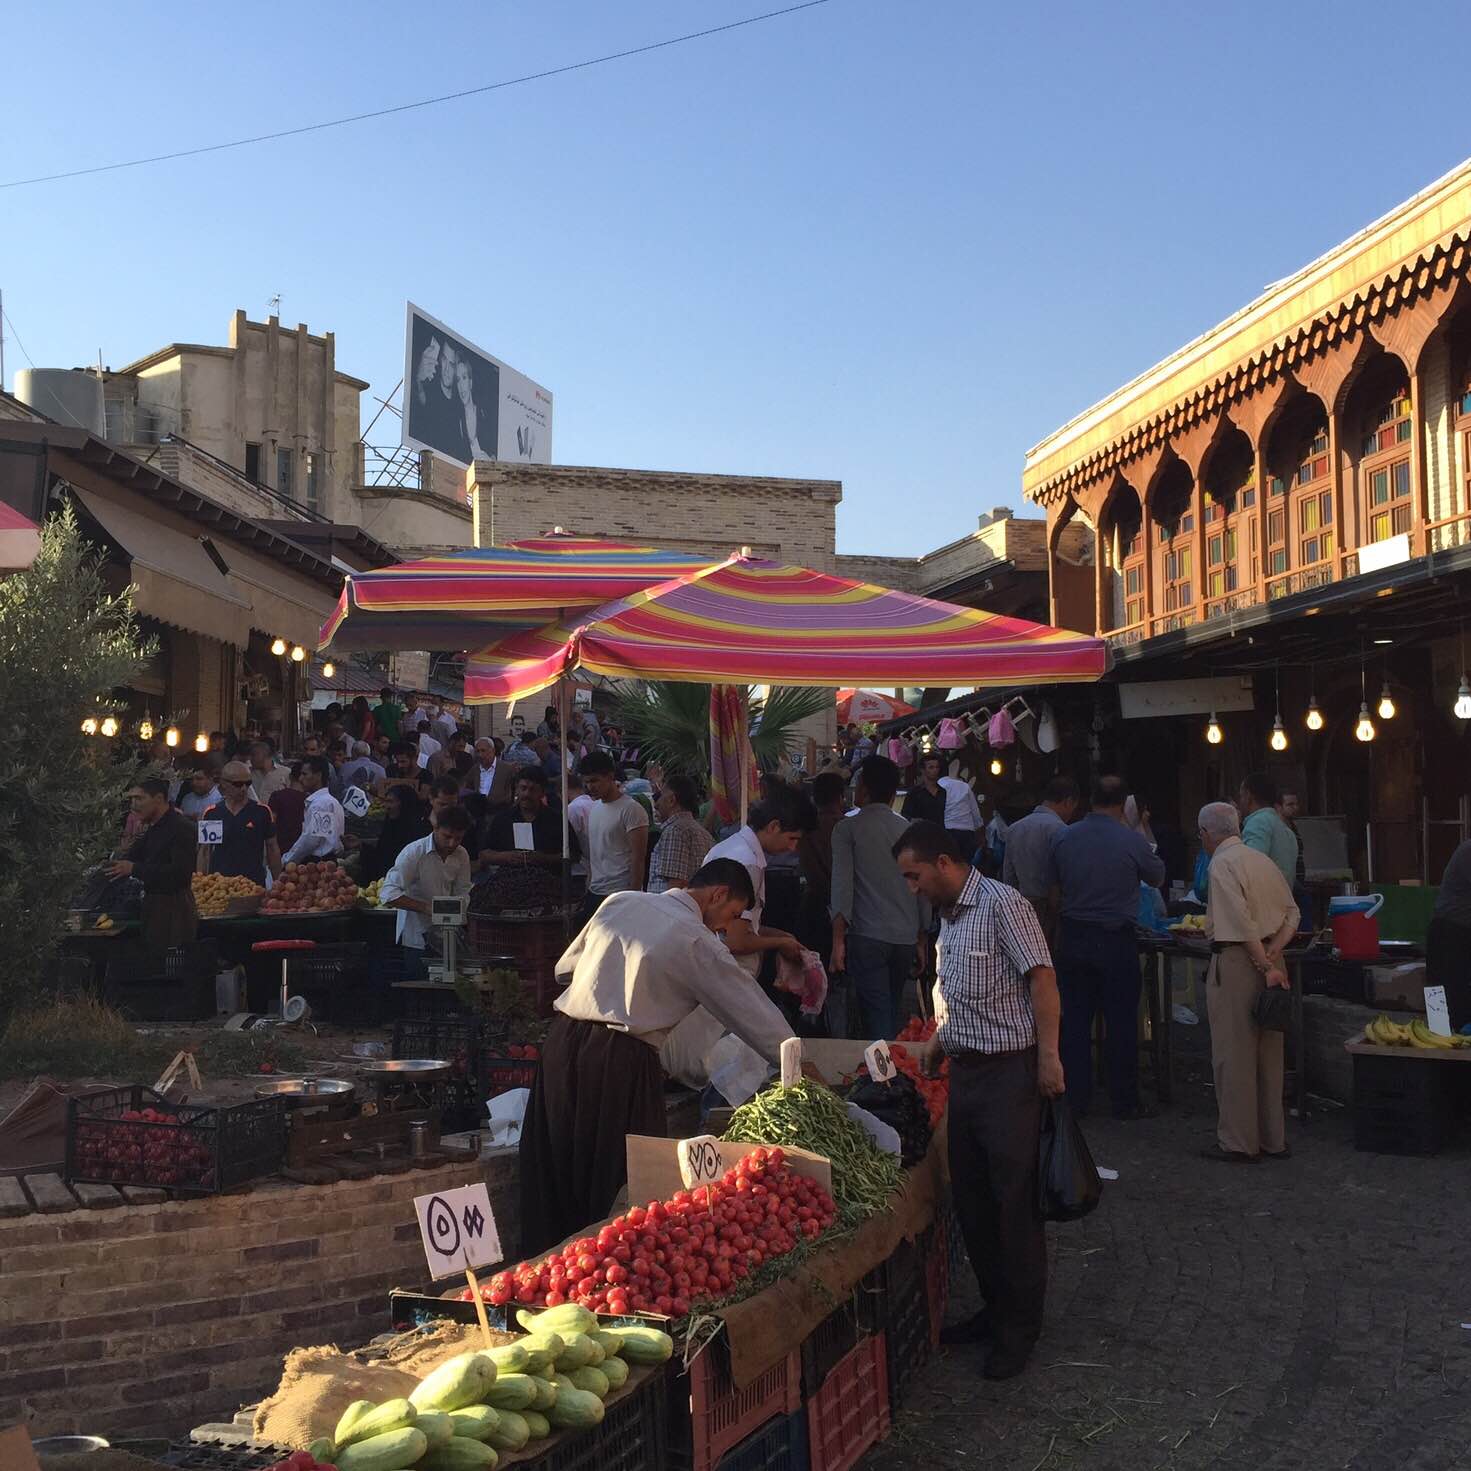 Local bazaar in Sulaimanyia